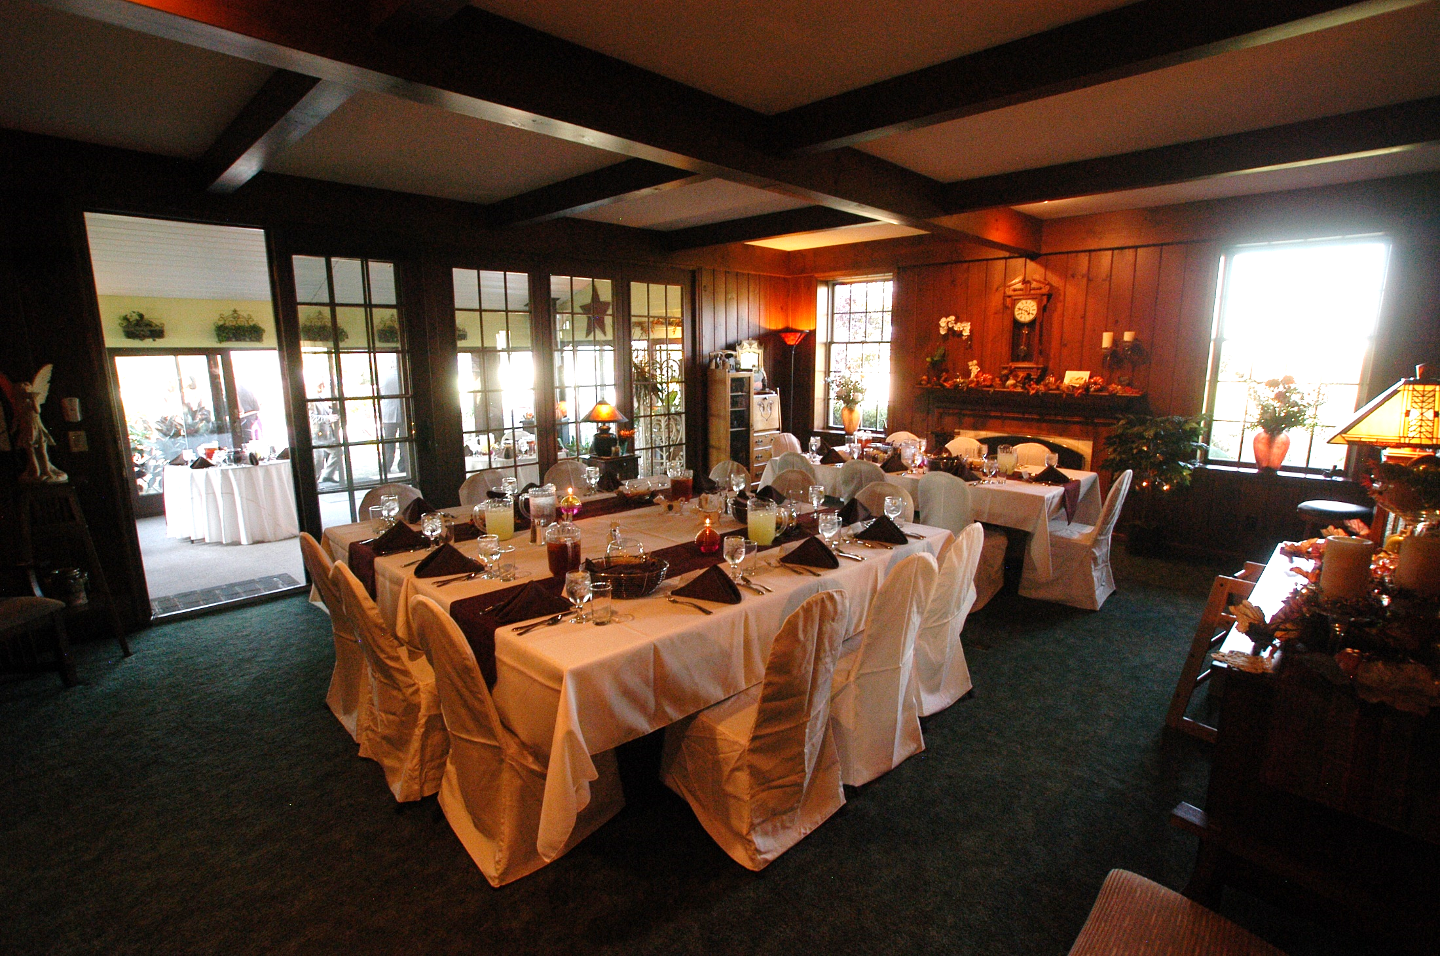 Annville Inn's Main Dining Room reset to host wedding party for luncheon.